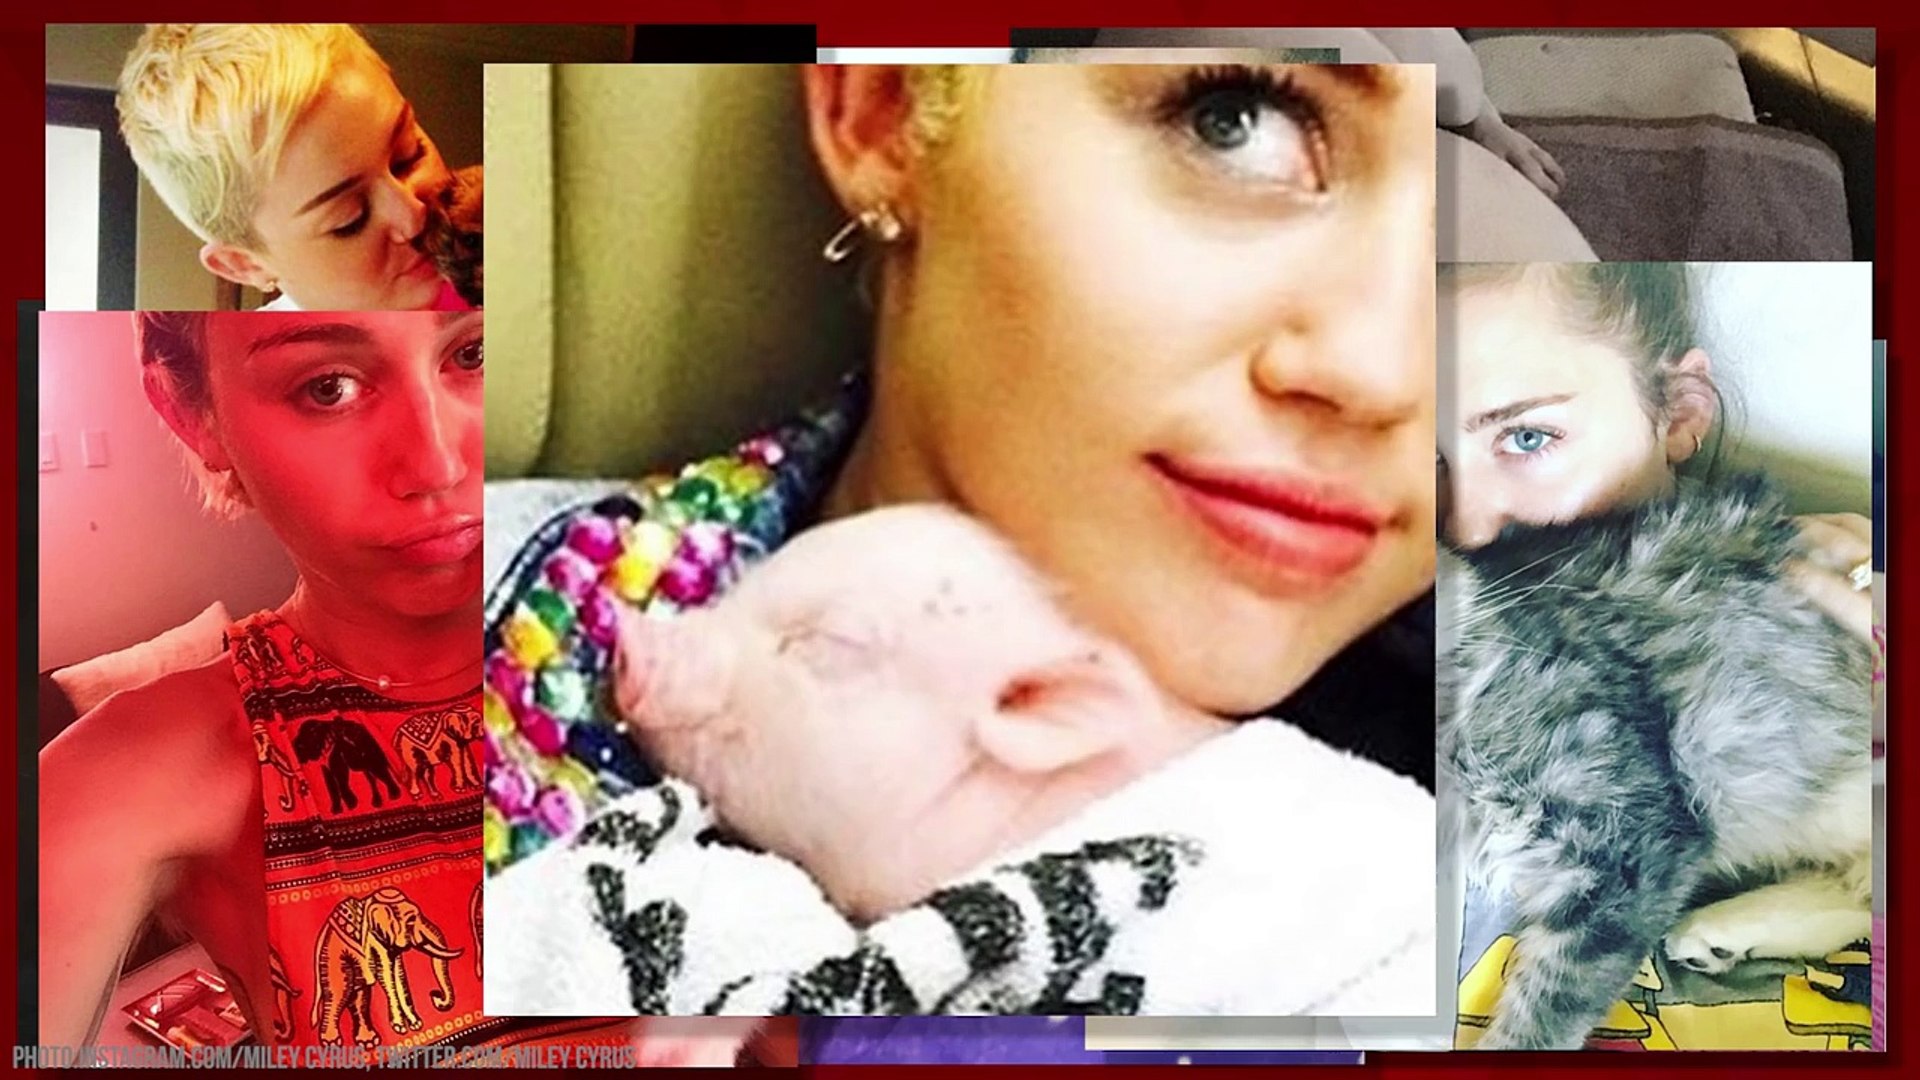 MILEY CYRUS ATTACKED BY A CAT?